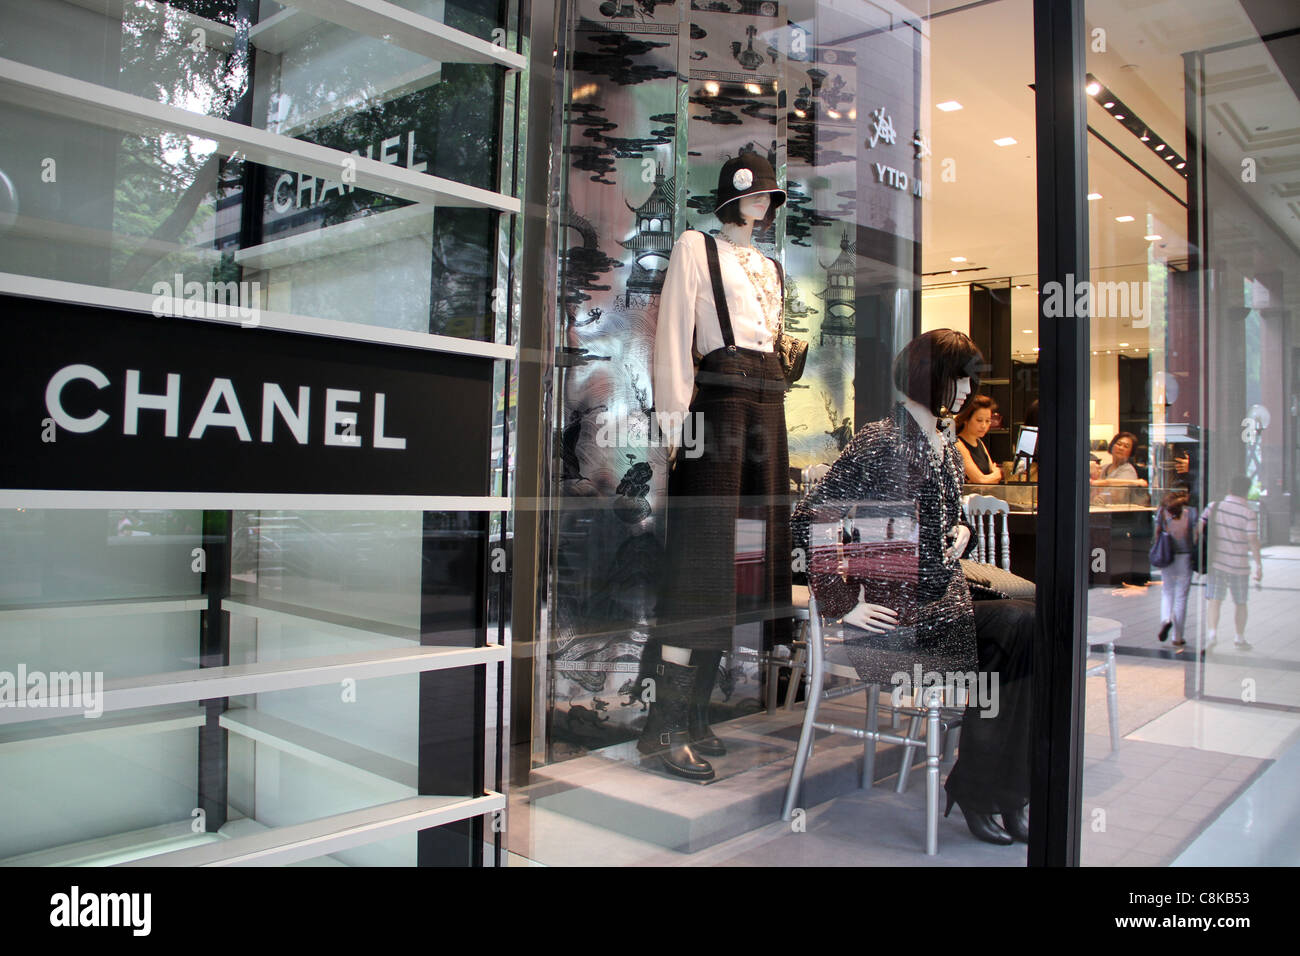 CHANEL - Jewelry Store in Orchard Road